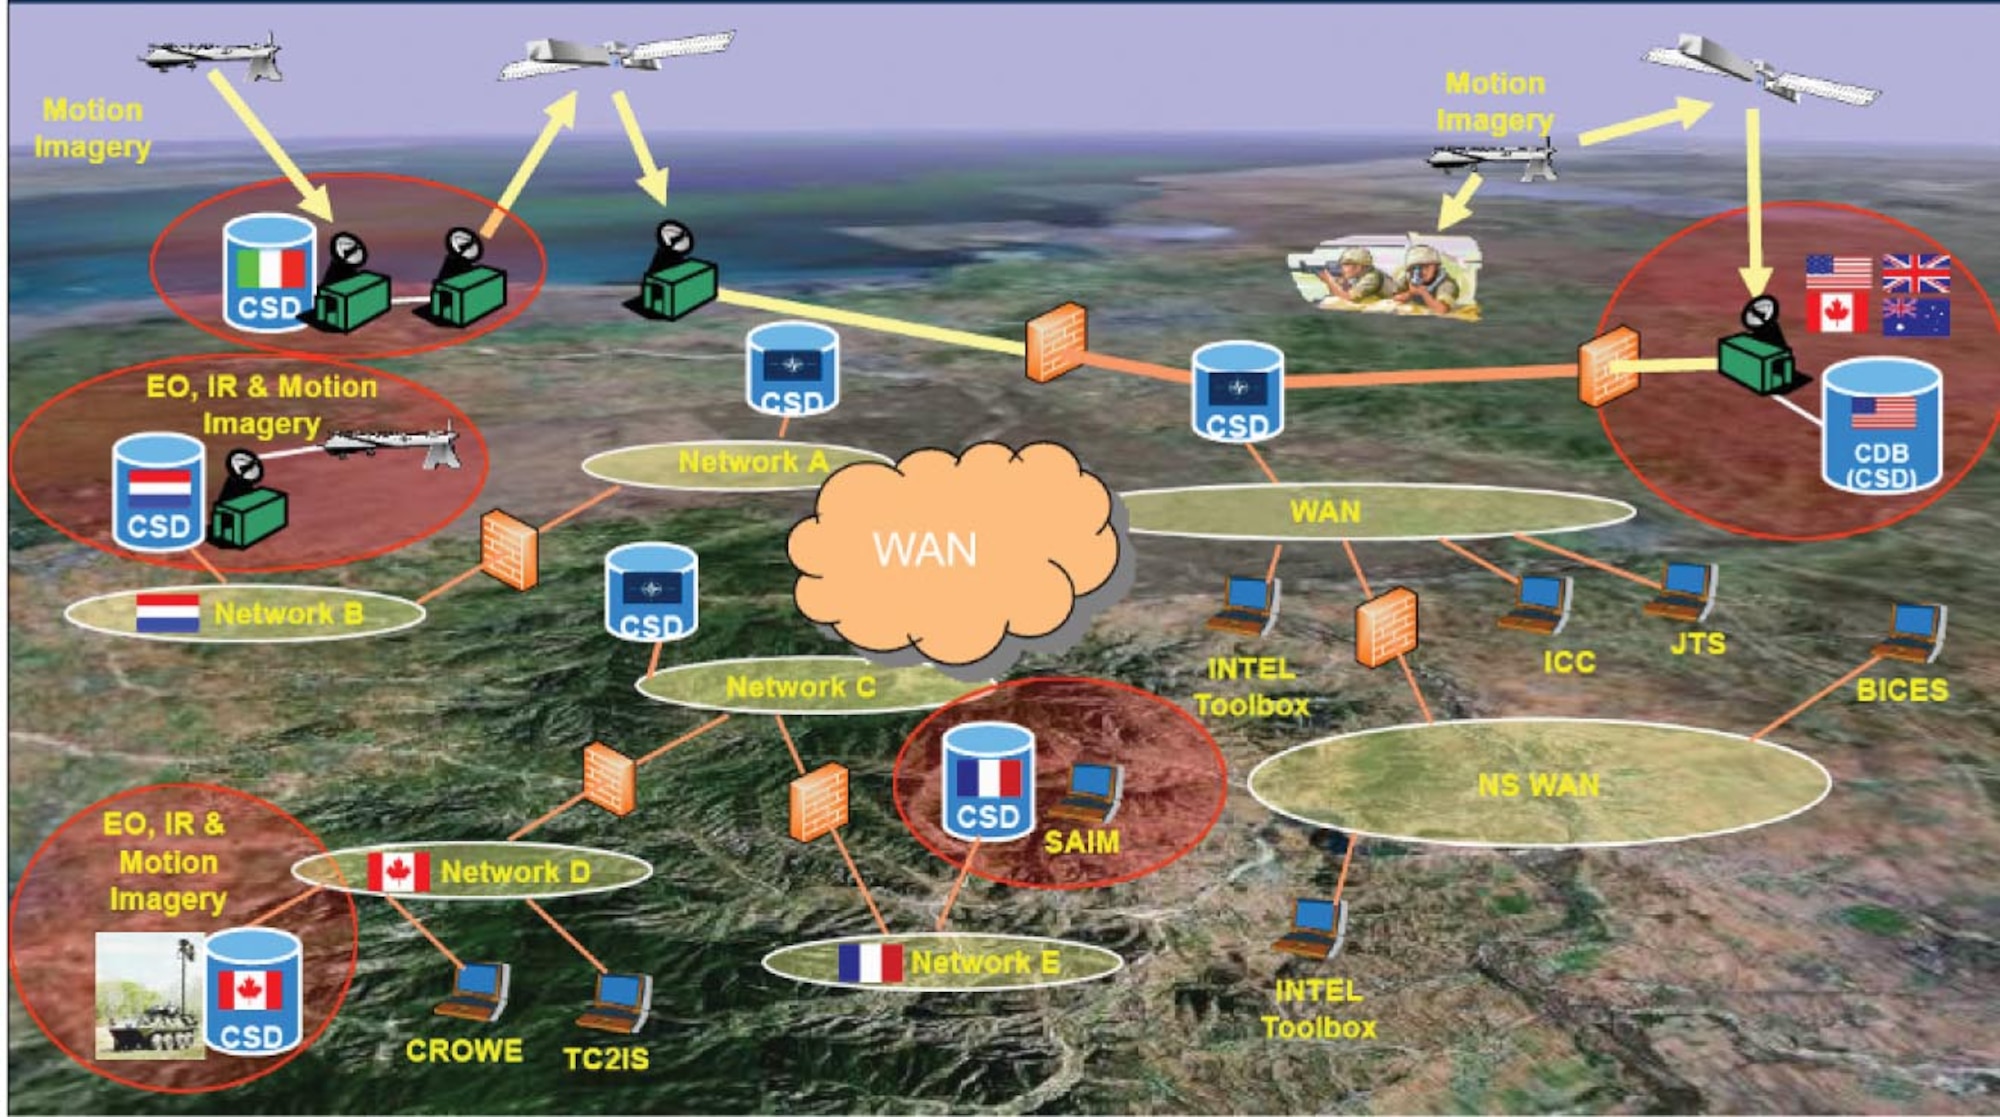 Coalition data broker enables metadata sharing between distributed common ground station and the CSD. AFRL Image. 